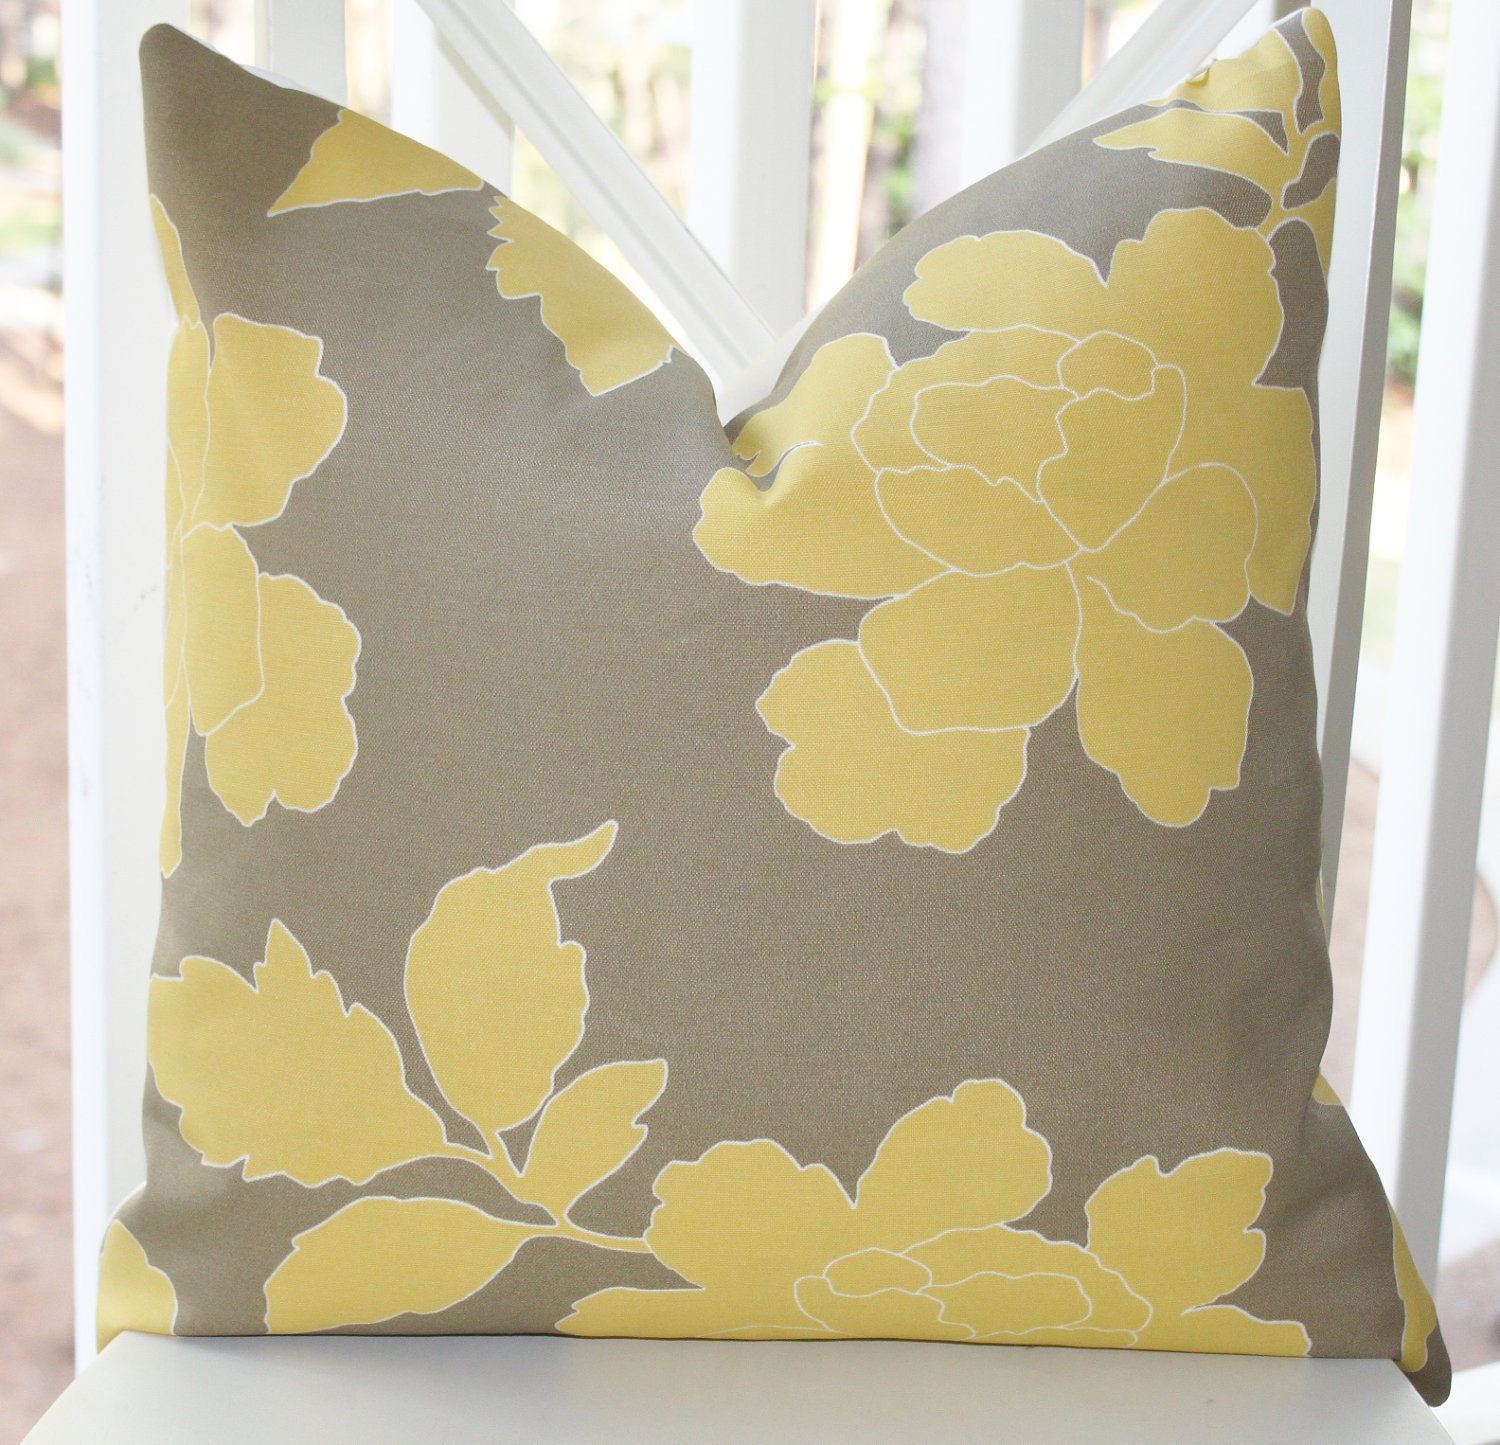 Decorative Pillow Cover Yellow Grey Dwell Studio by MotifPillows